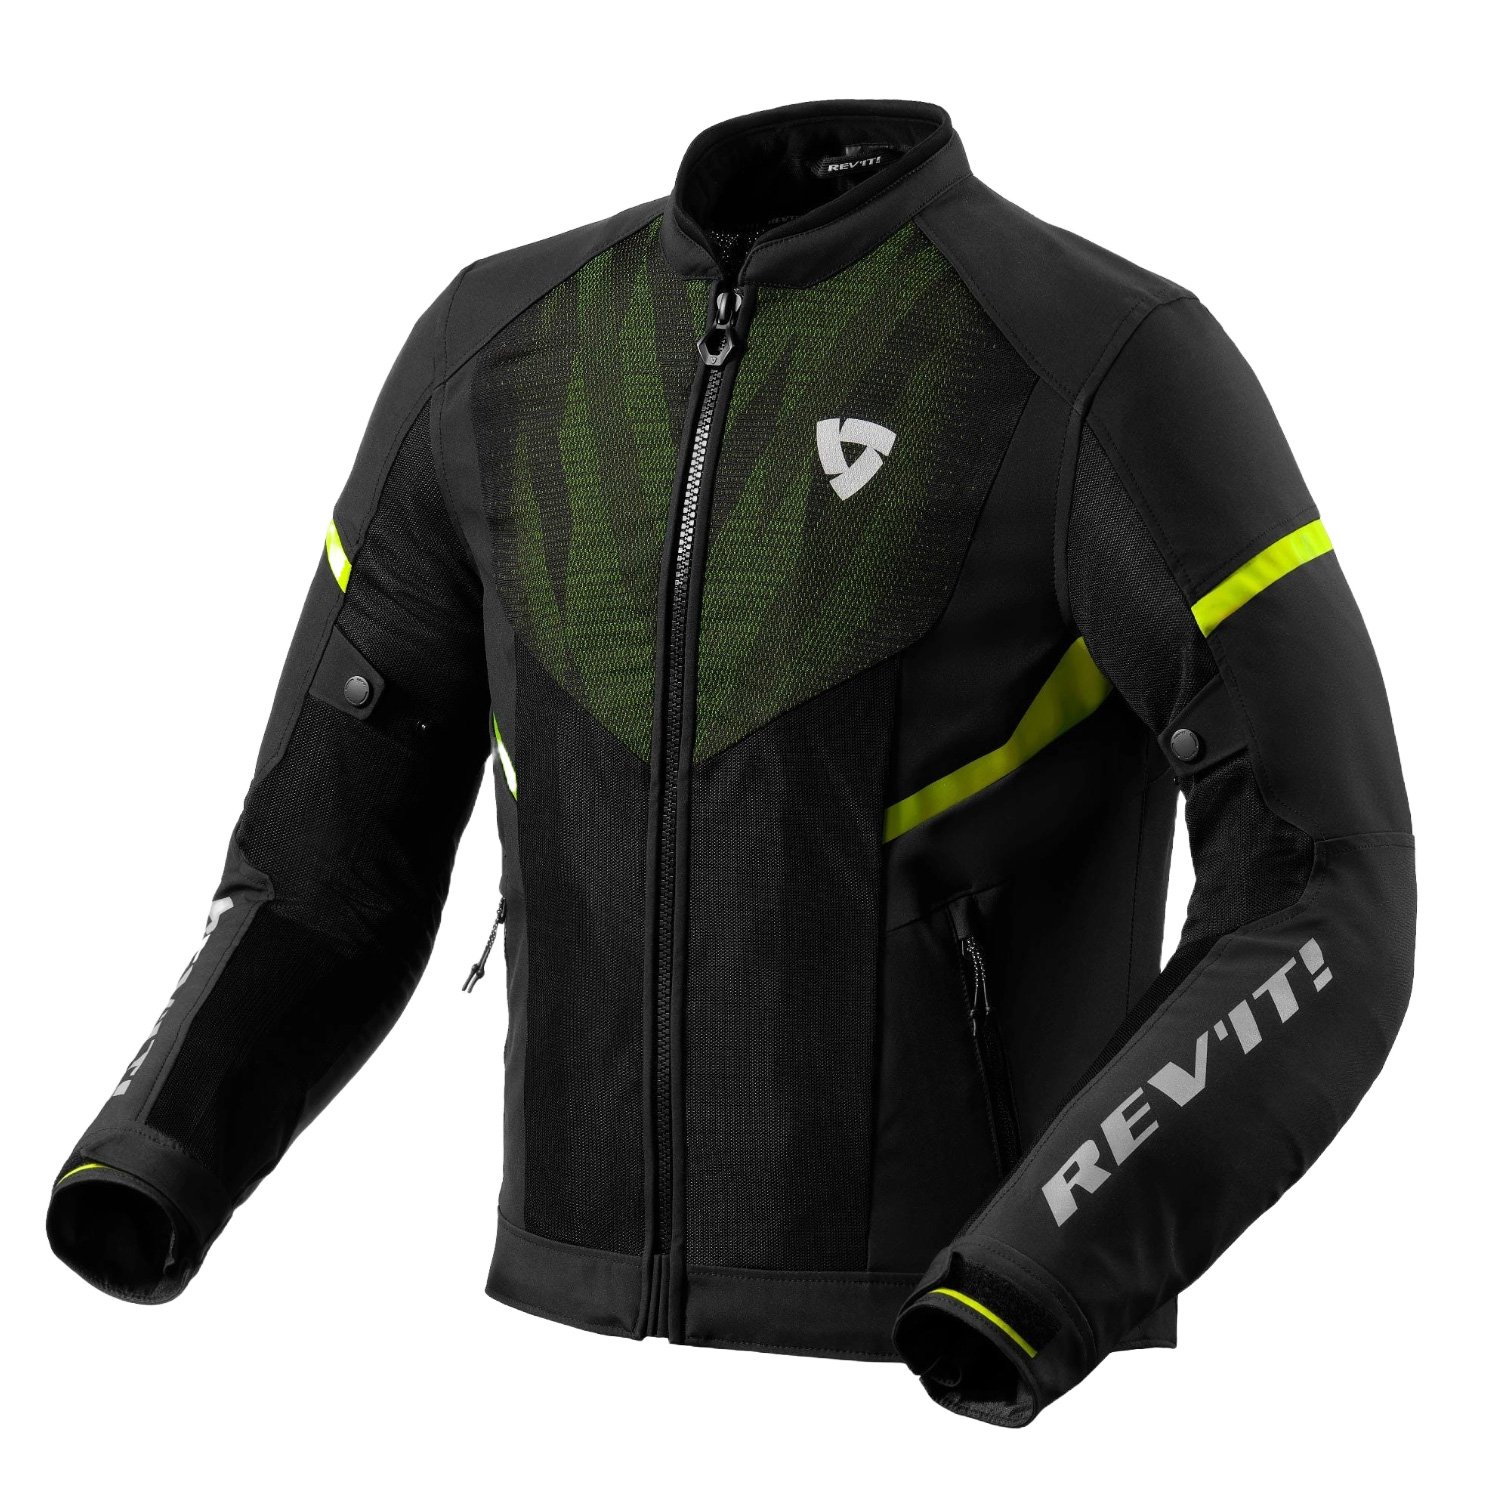 Image of REV'IT! Hyperspeed 2 GT Air Jacket Black Neon Yellow Size M ID 8700001367592